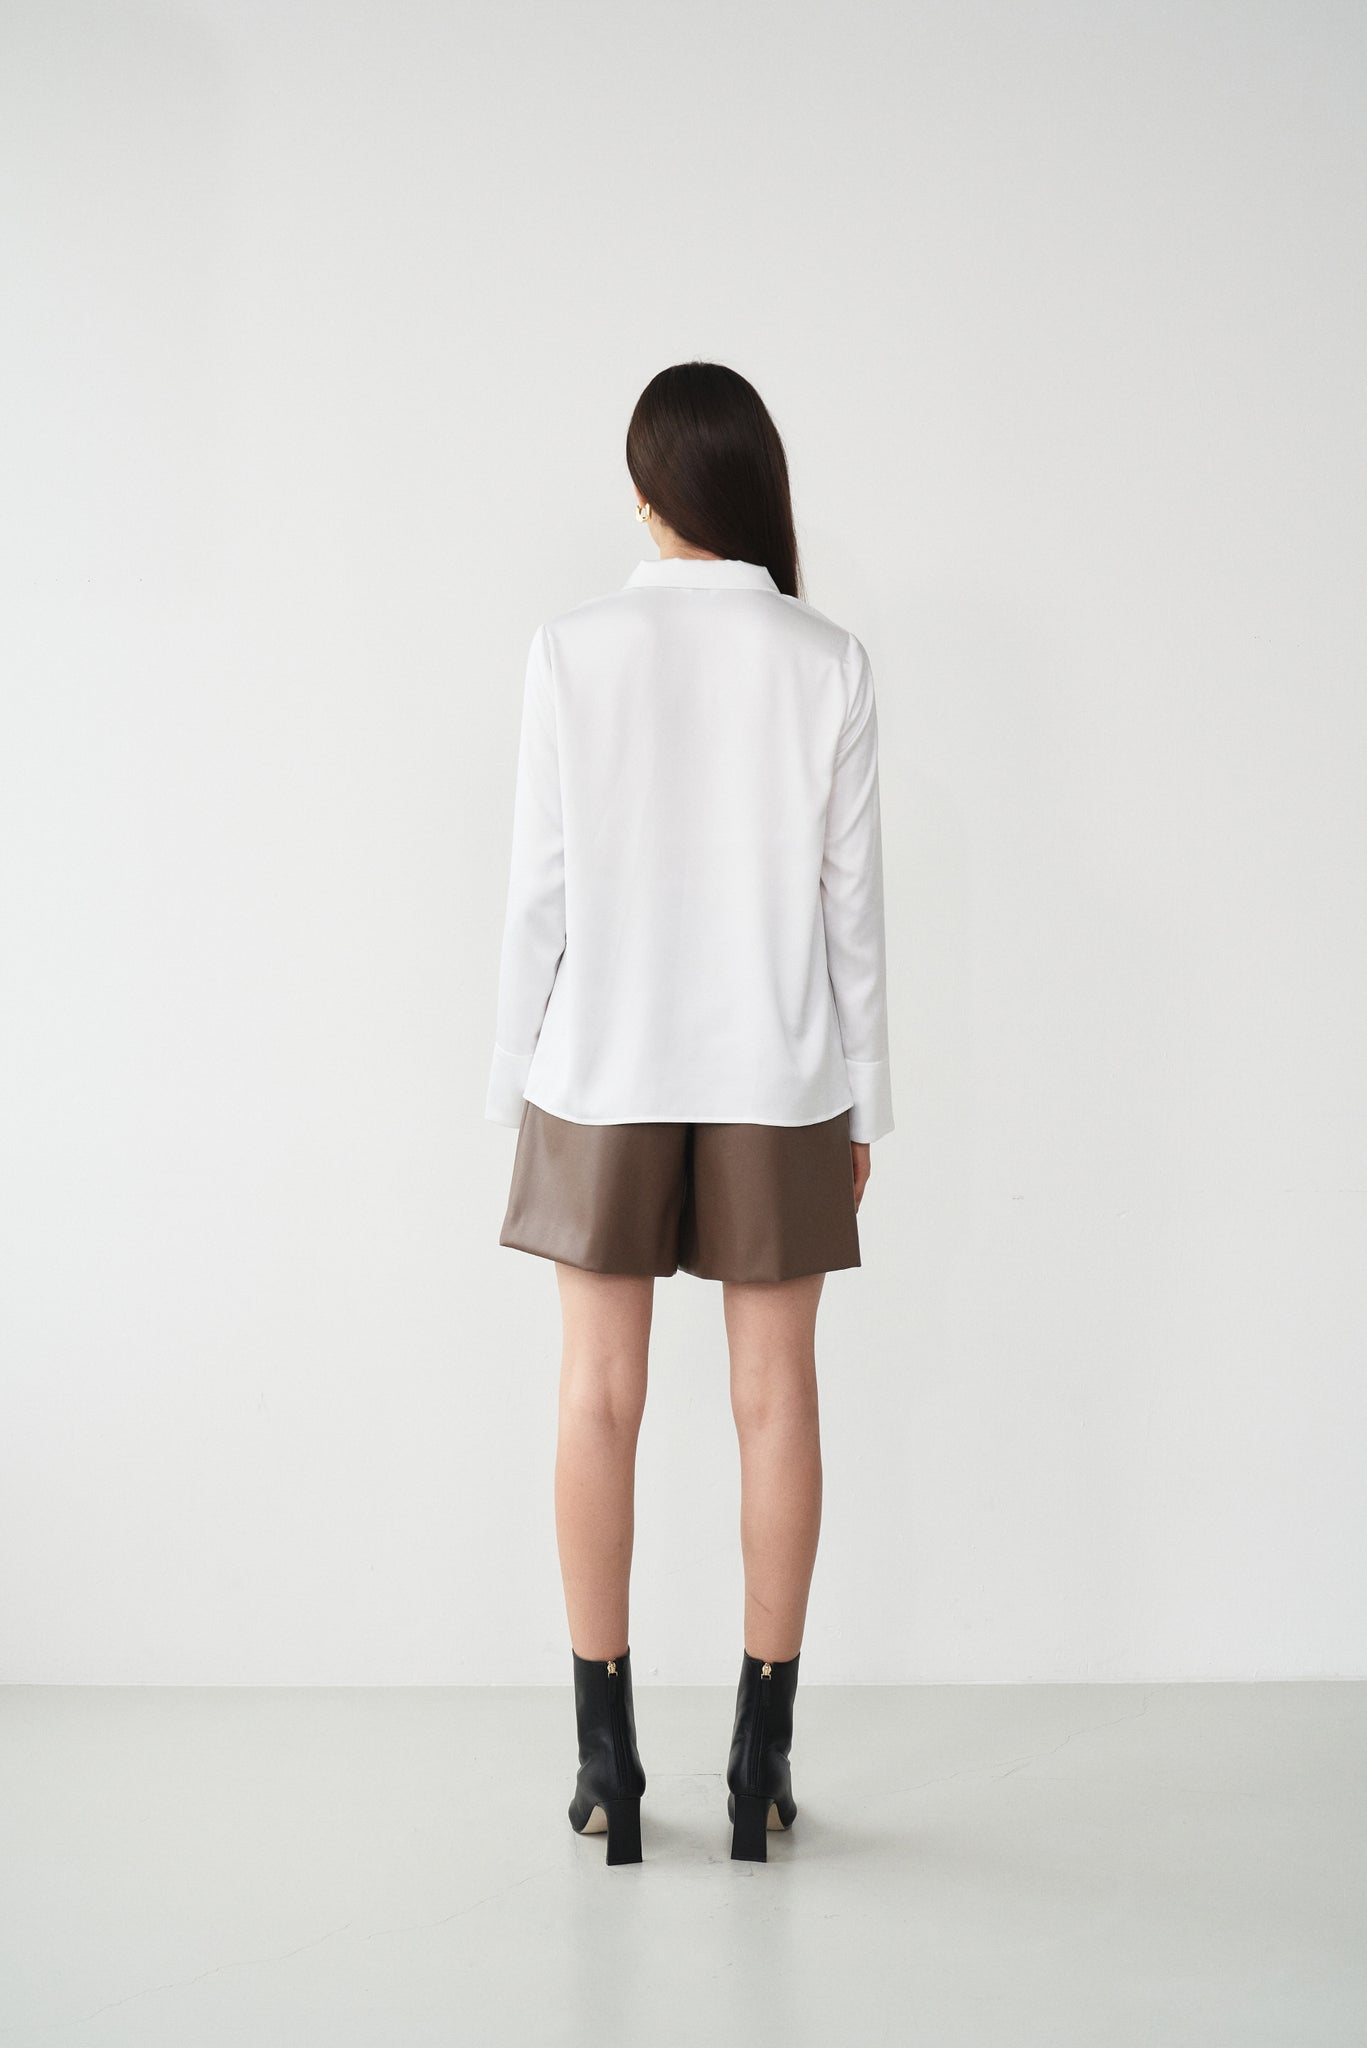 Jula Faux Leather Shorts - LINGER GALLERY